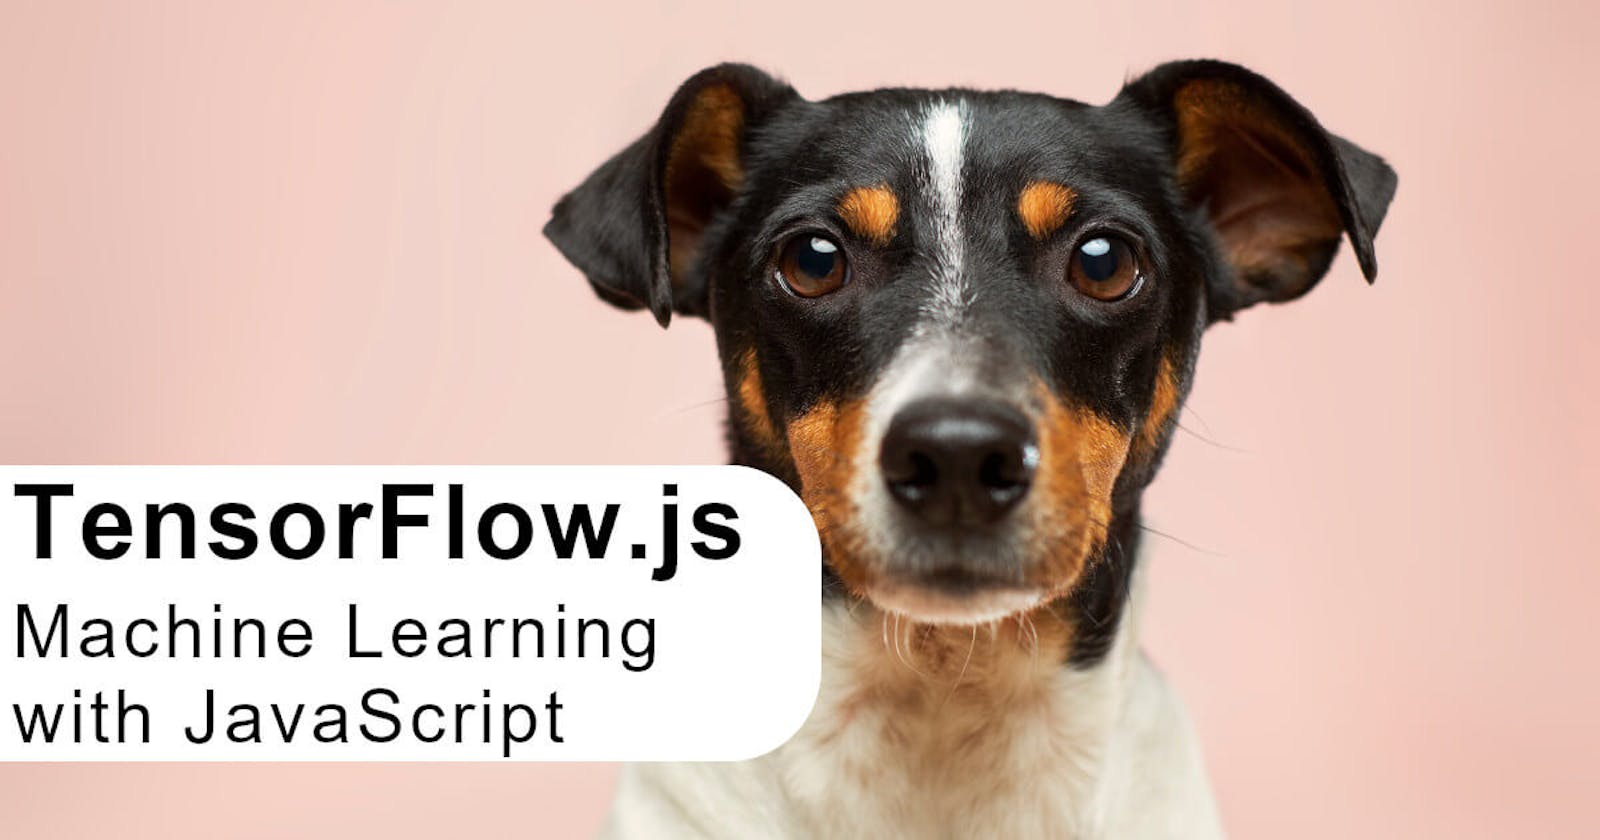 Machine Learning with TensorFlow.js (Yes, JavaScript) | Image Classification and Object Detection